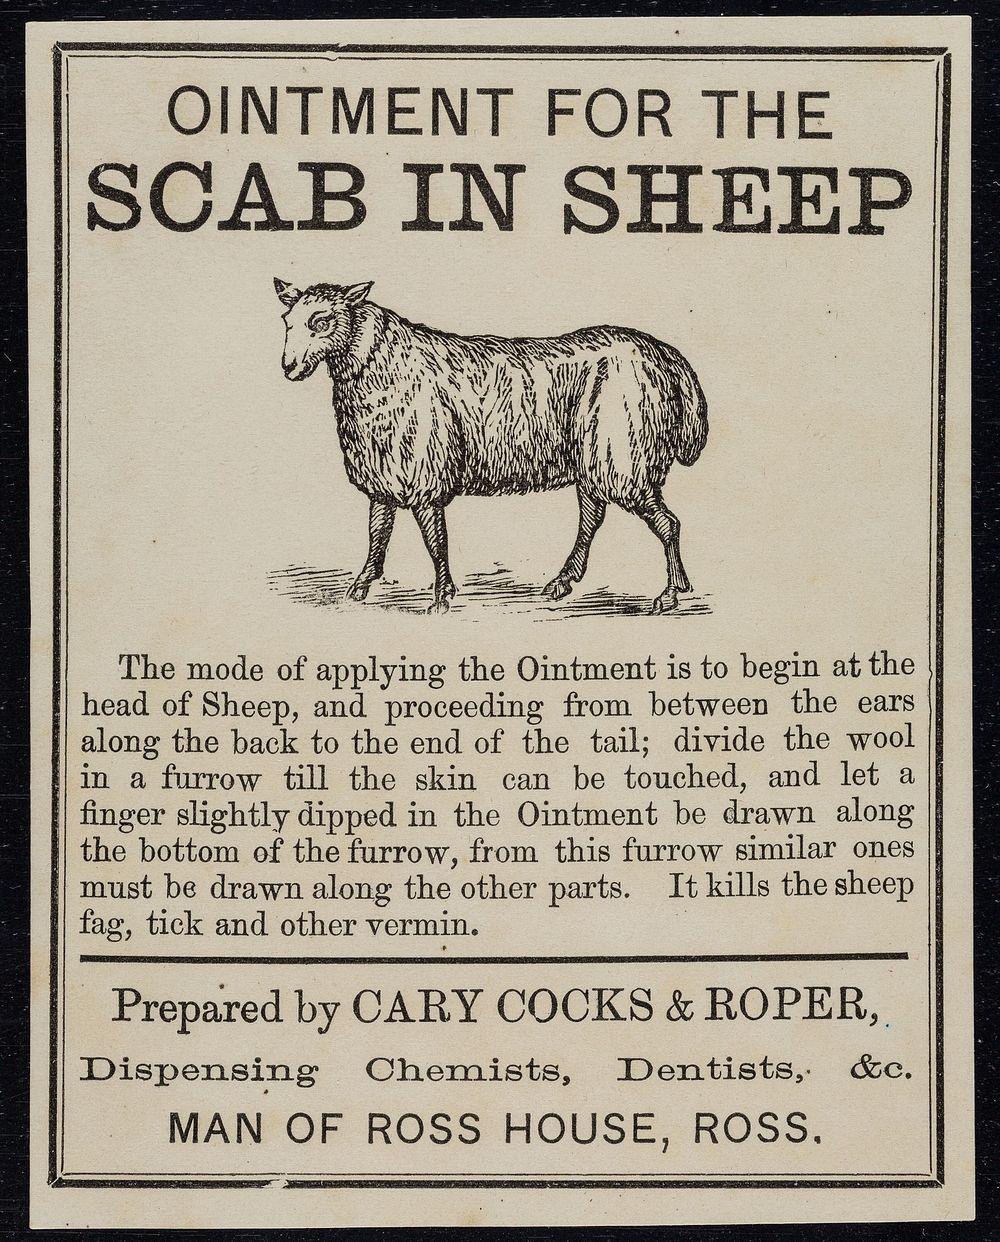 Ointment for the scab in sheep / prepared by Cary Cocks and Roper.